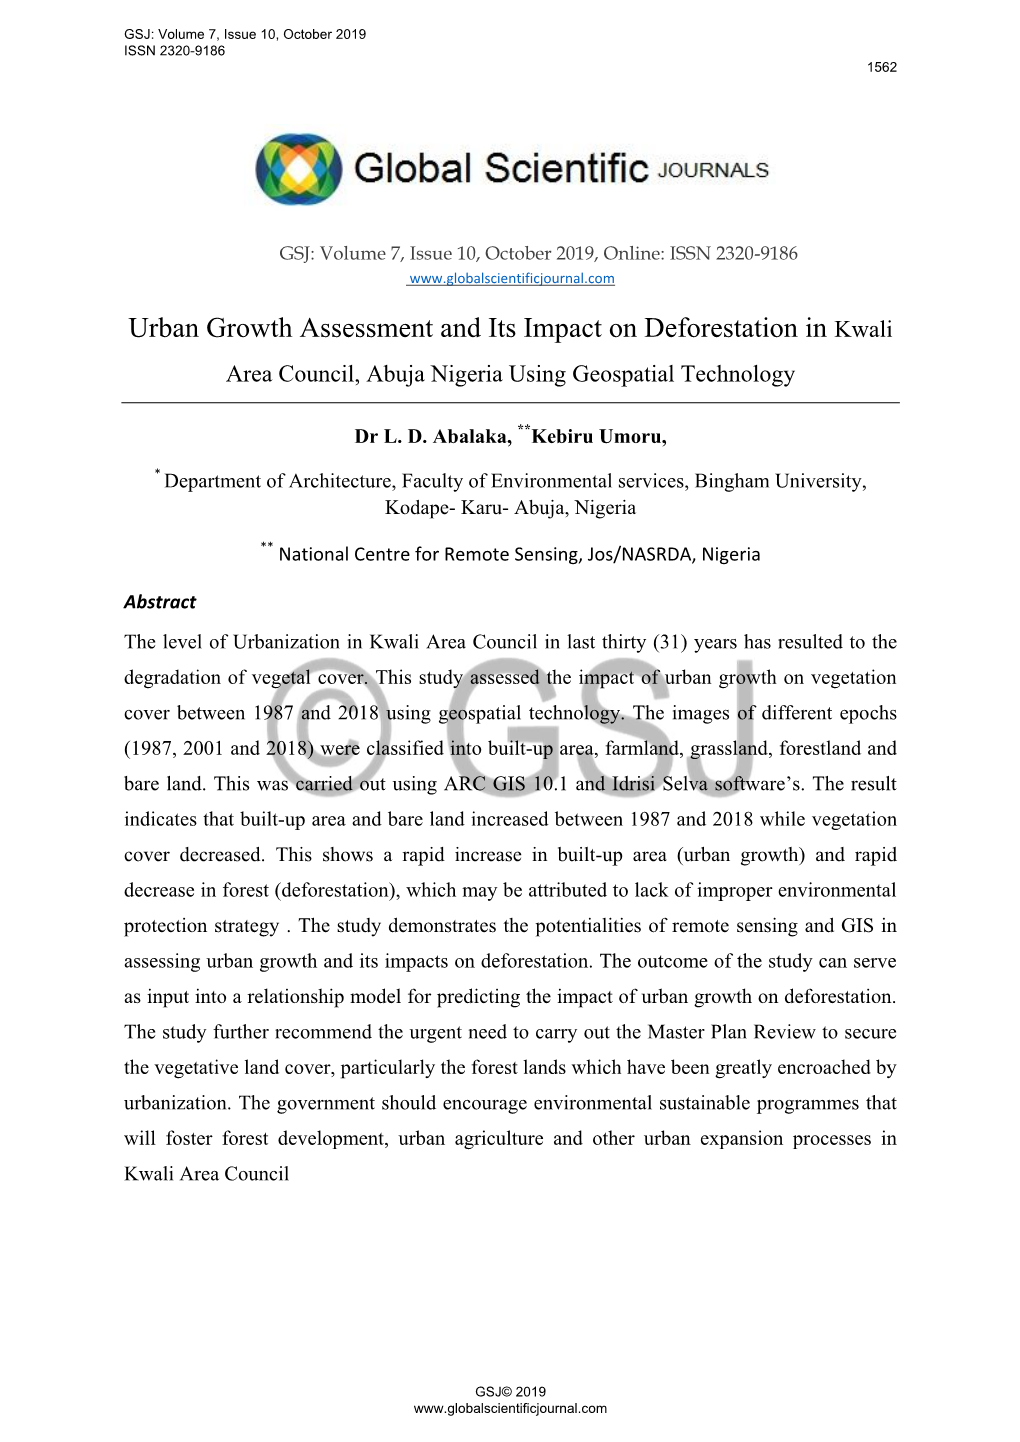 Urban Growth Assessment and Its Impact on Deforestation in Kwali Area Council, Abuja Nigeria Using Geospatial Technology